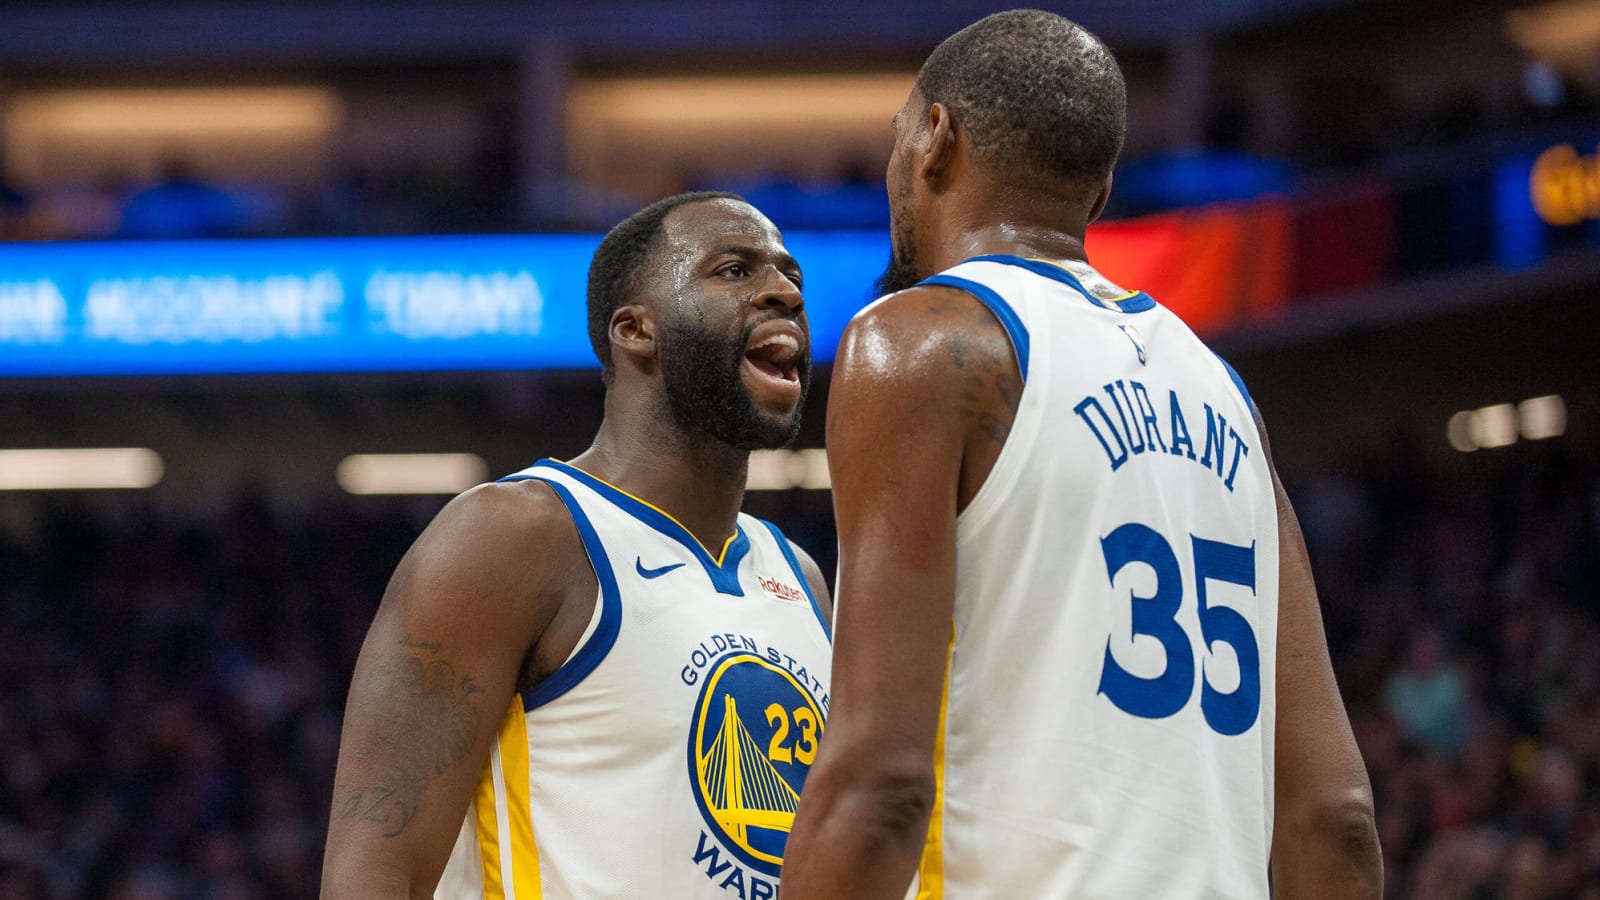 KD admits he started 'isolating' himself after Draymond feud